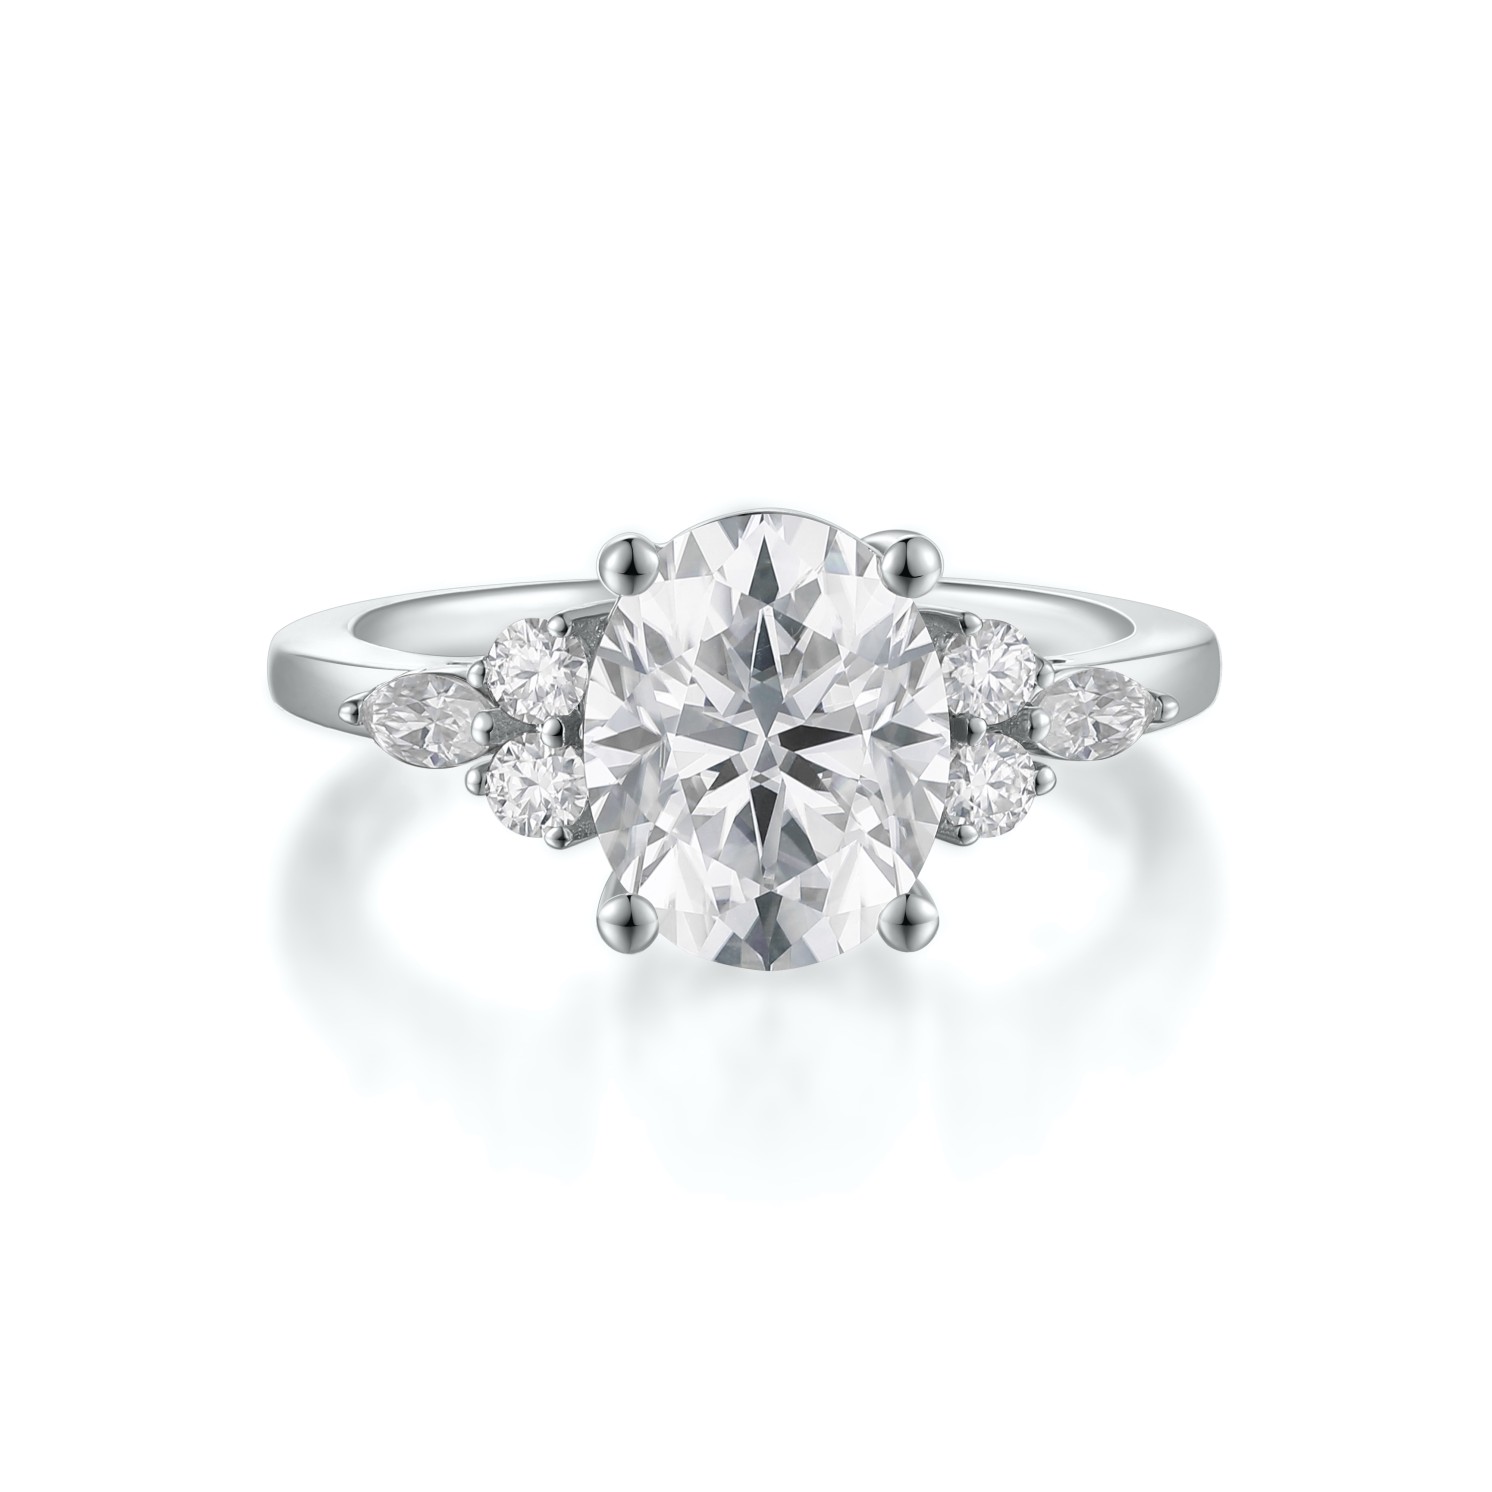 Lustrina - Oval Moissanite Ring with Dazzling Accents